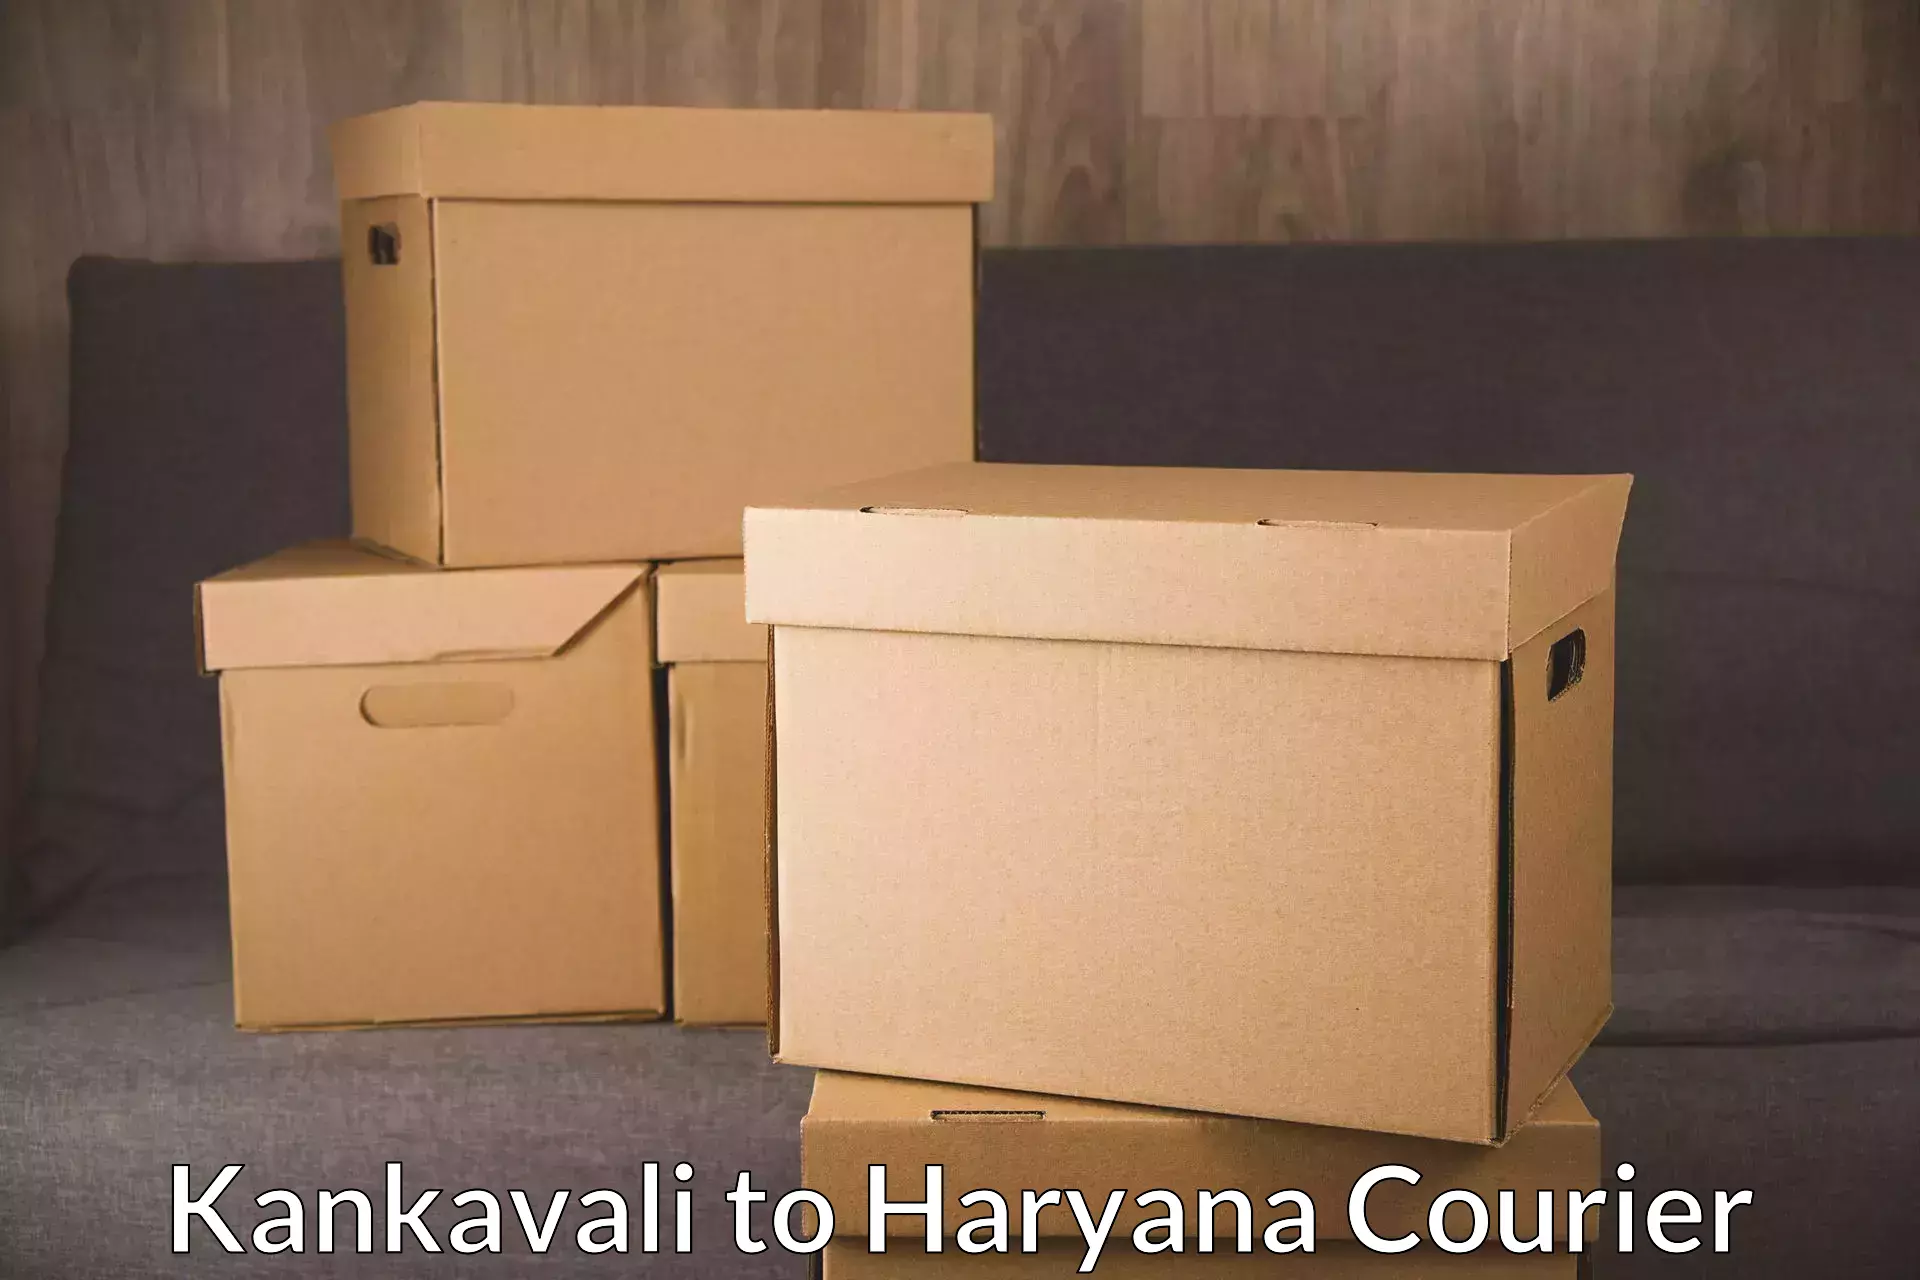 Sustainable delivery practices Kankavali to Haryana